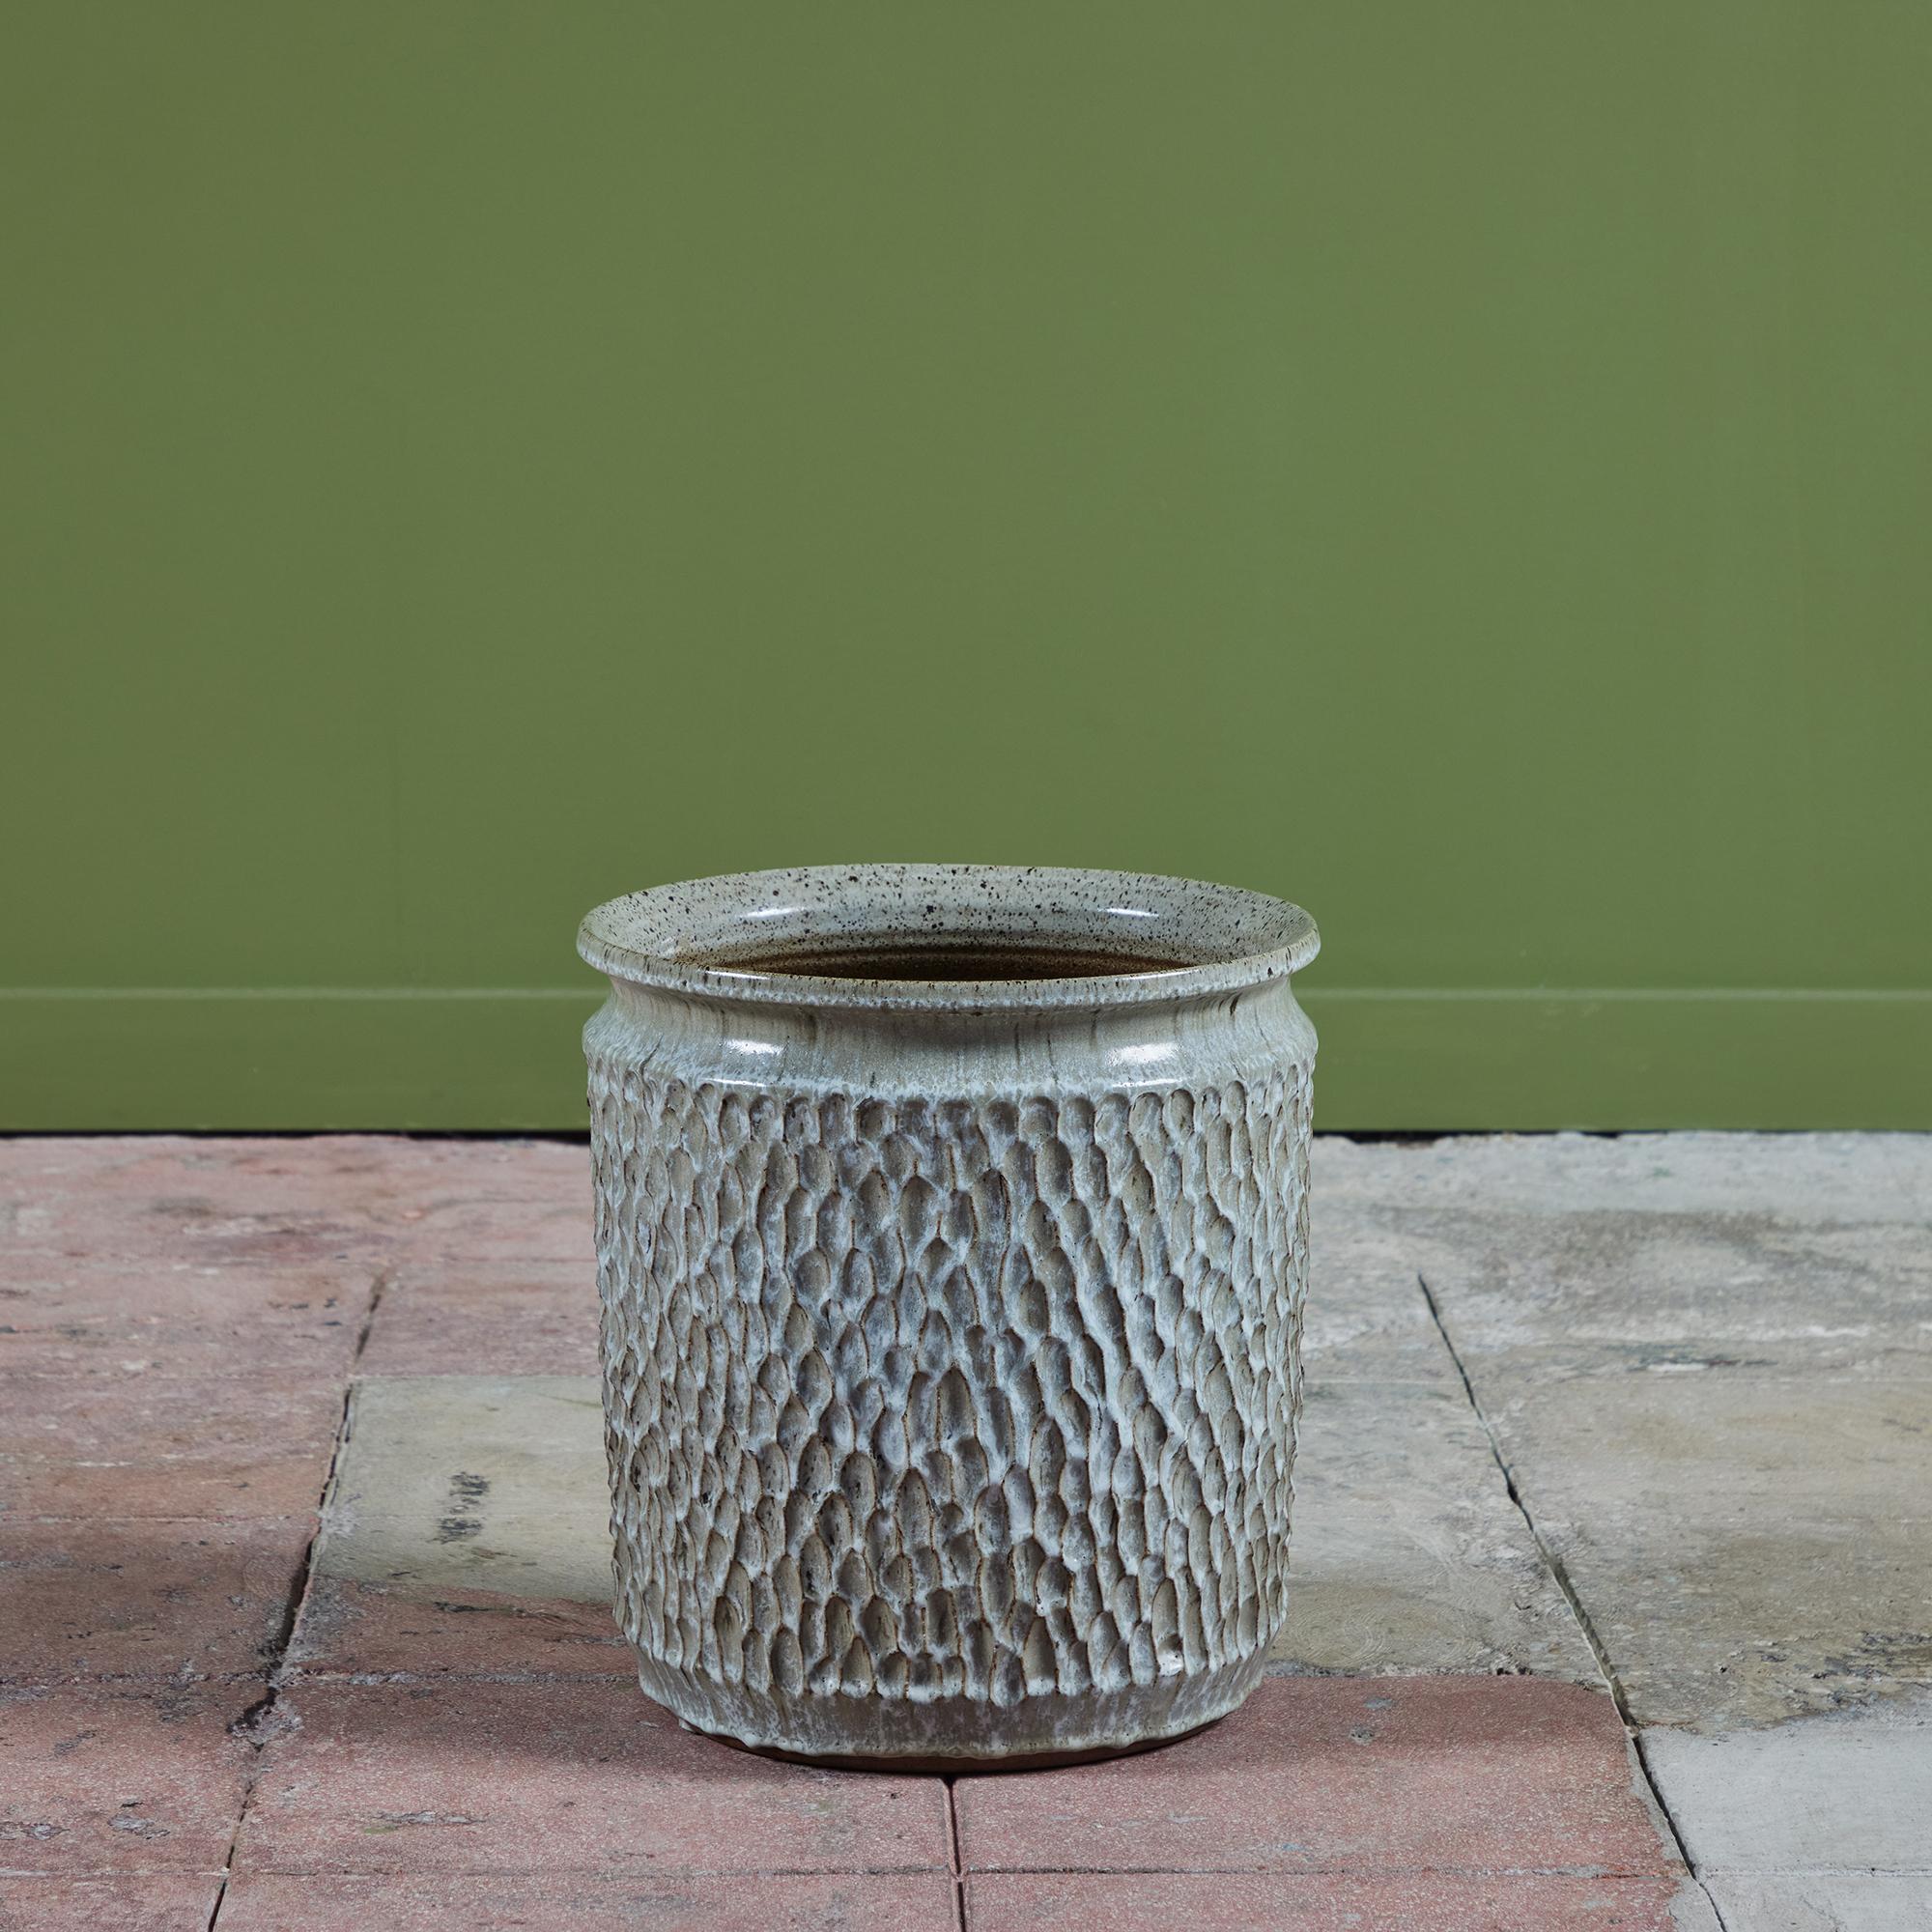 Hand thrown planter, c.1970s, USA, is a result of the collaboration between David Cressey & Robert Maxwell to create the line Earthgender. One of the less common designs from this partnership, the ‘thumbprint’ pattern has a textured surface of